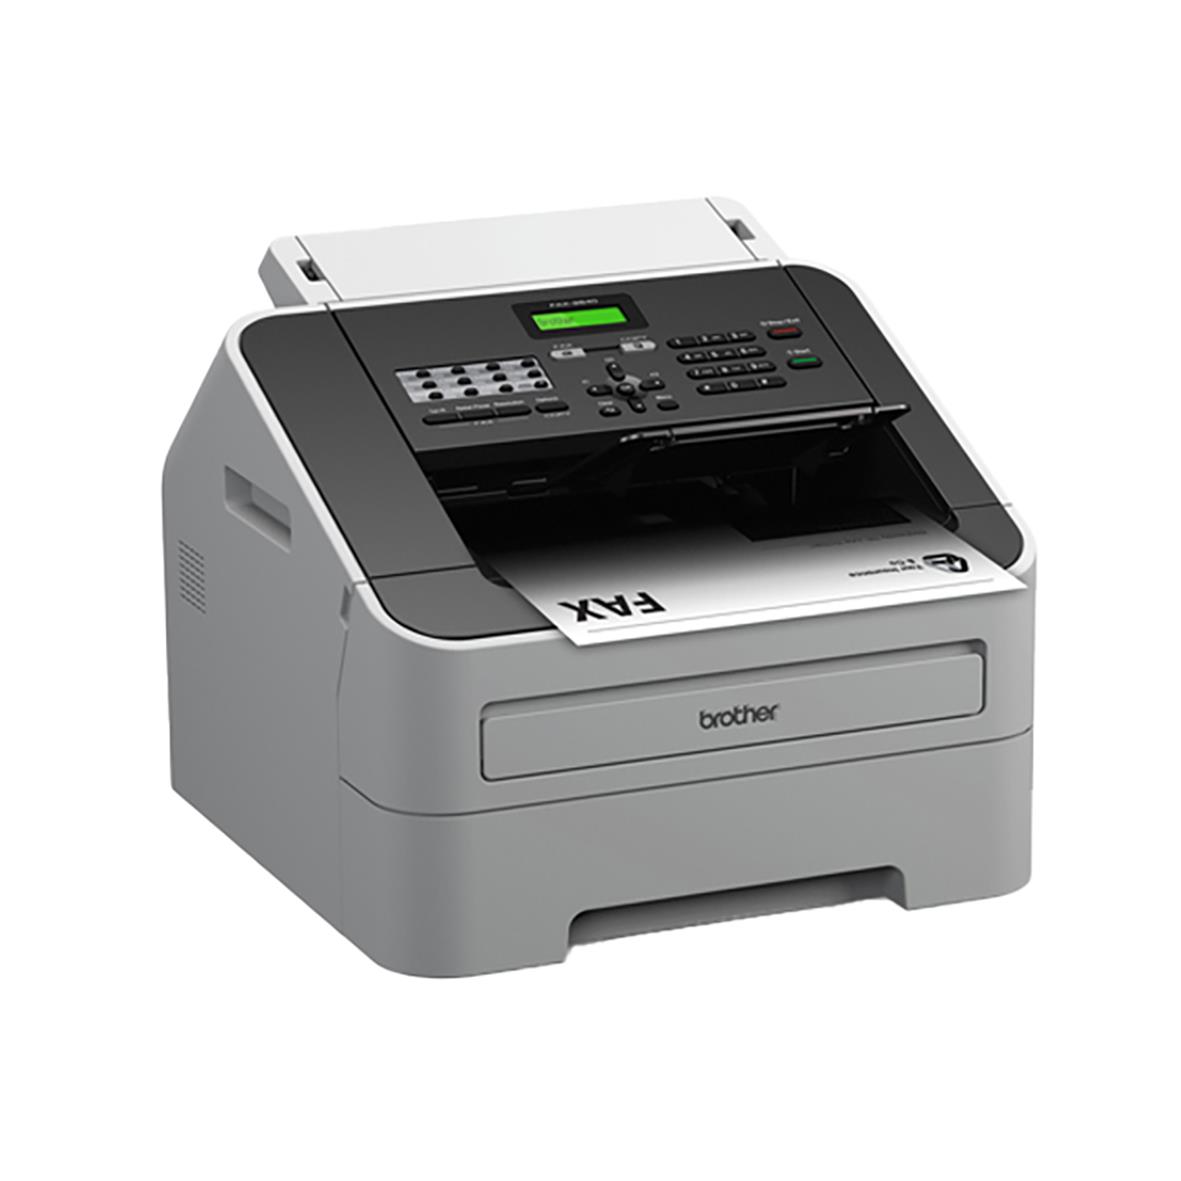 Fax Brother 2840 Laser